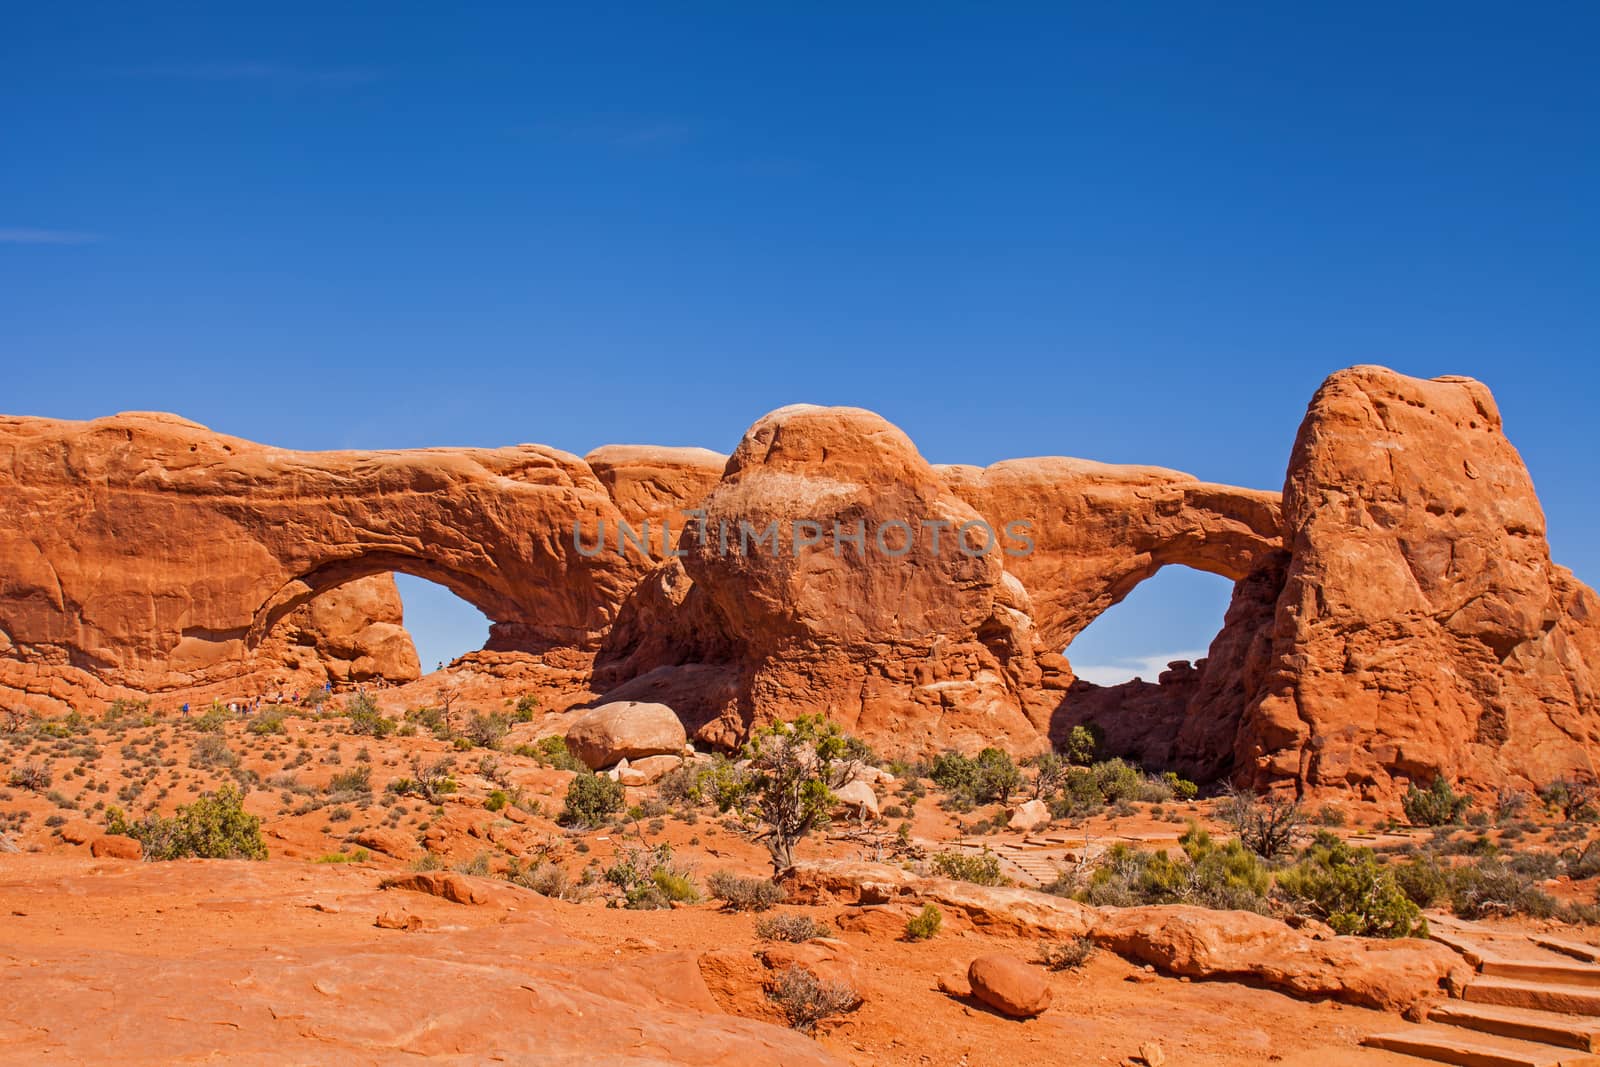 The North and South windows, the origin of the "Windows Section" of Arches National Park in Utah, USA